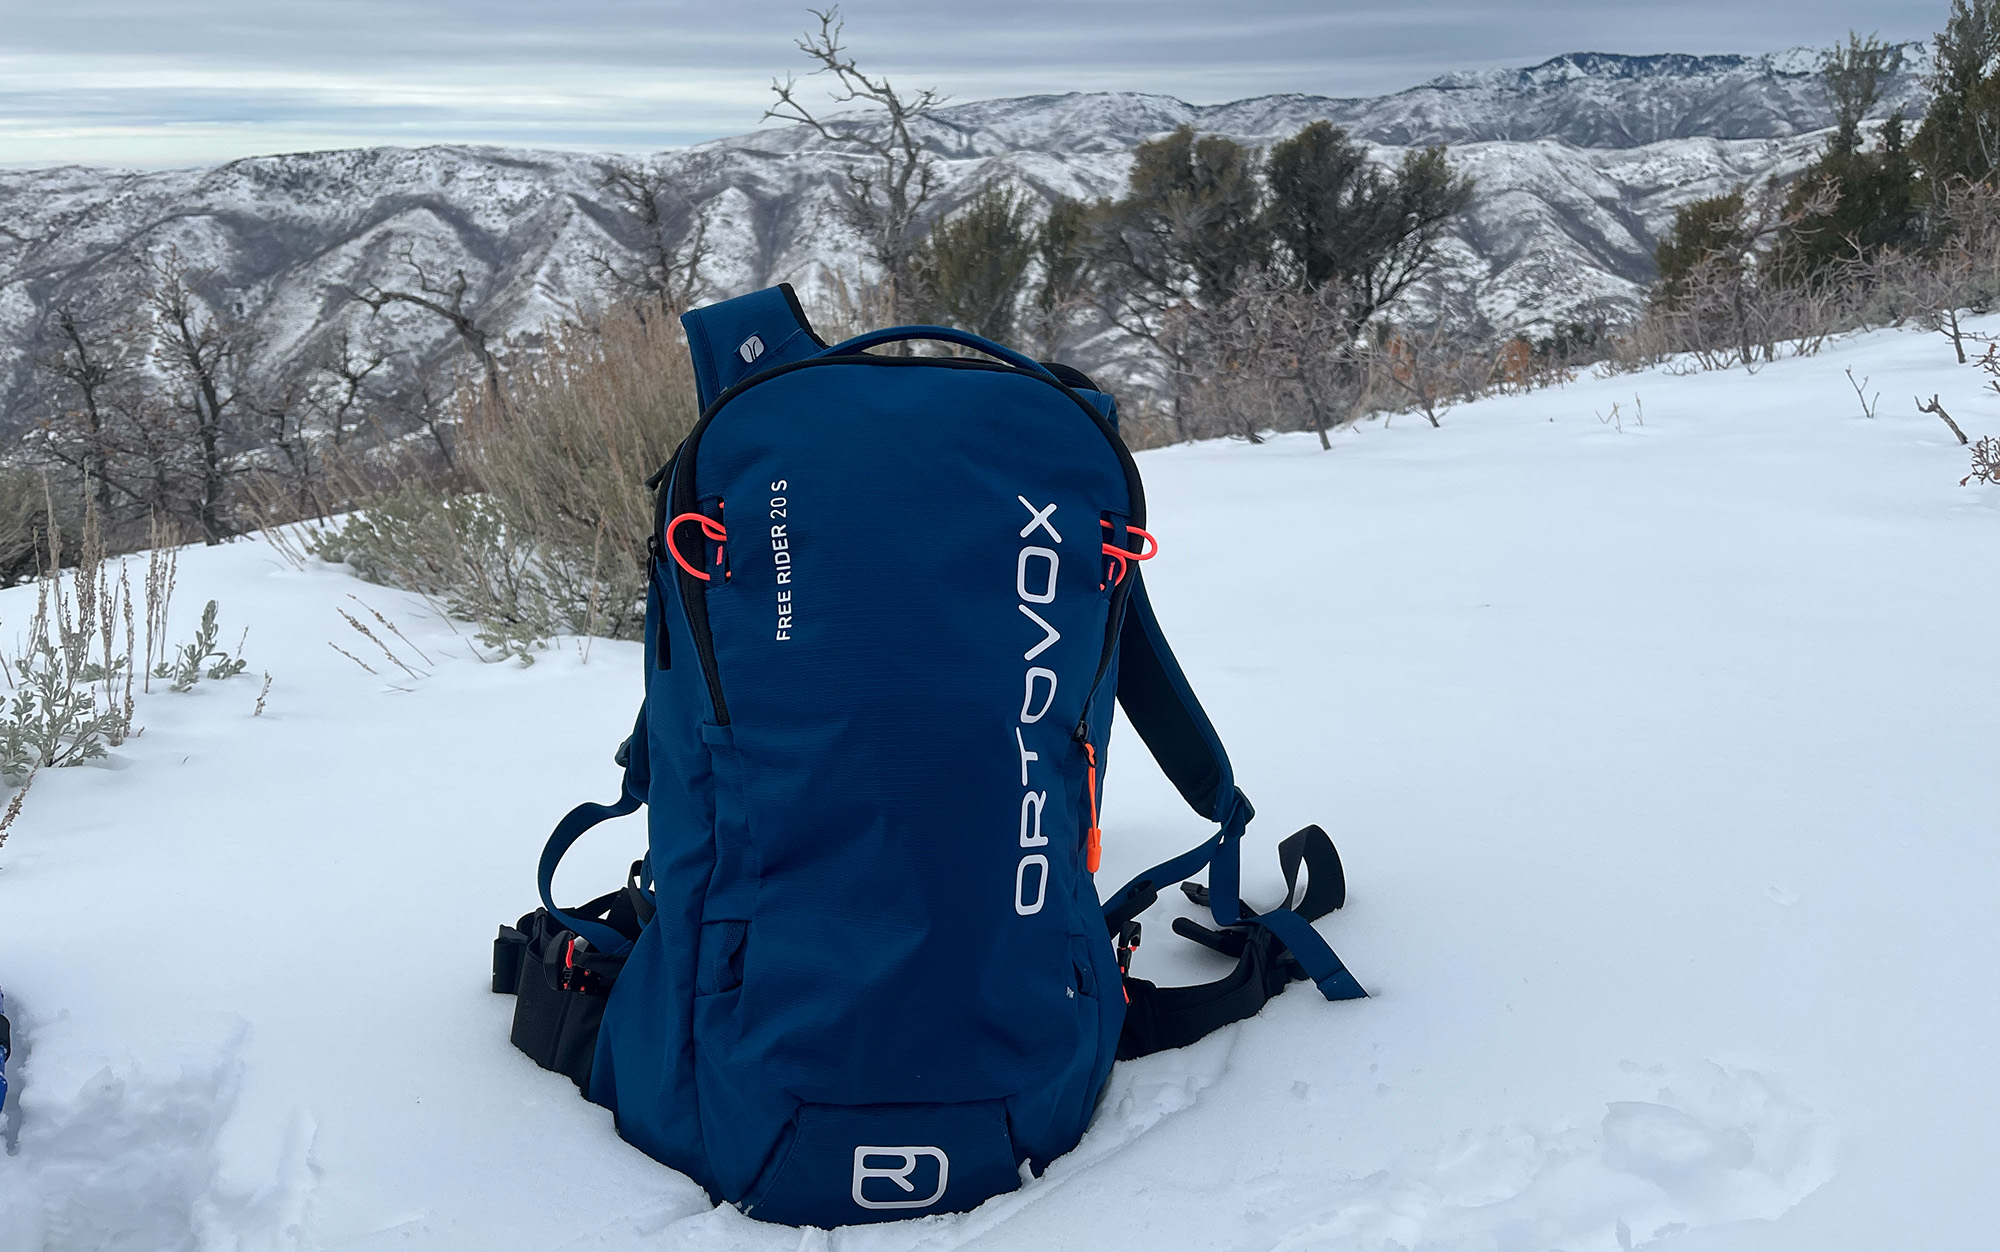 The Ortovox is one of the best winter backpacks.